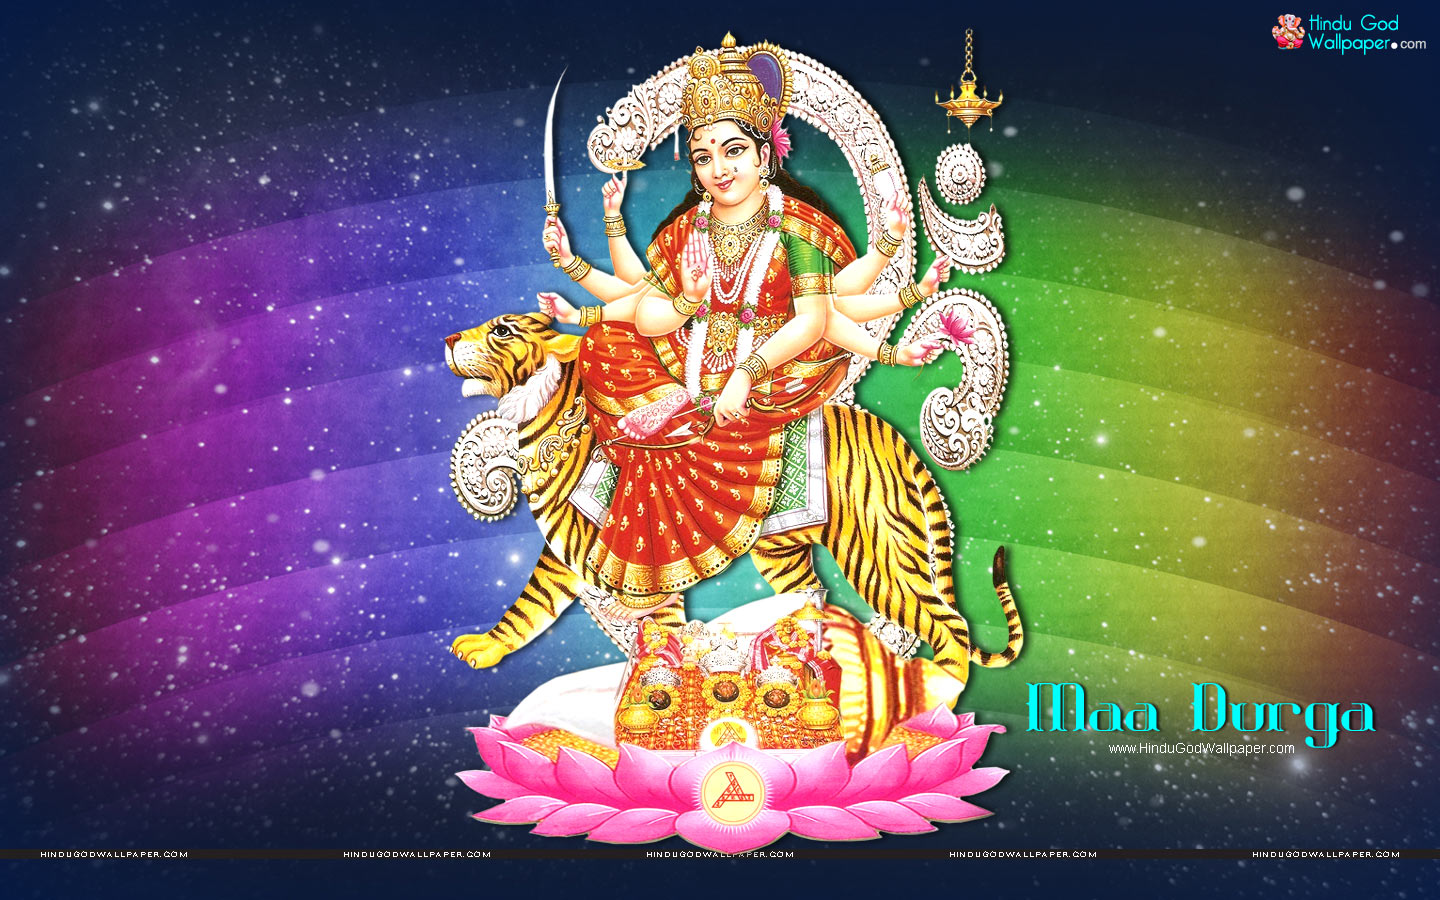 Mahanavami Wallpapers, Pictures and Images Free Download